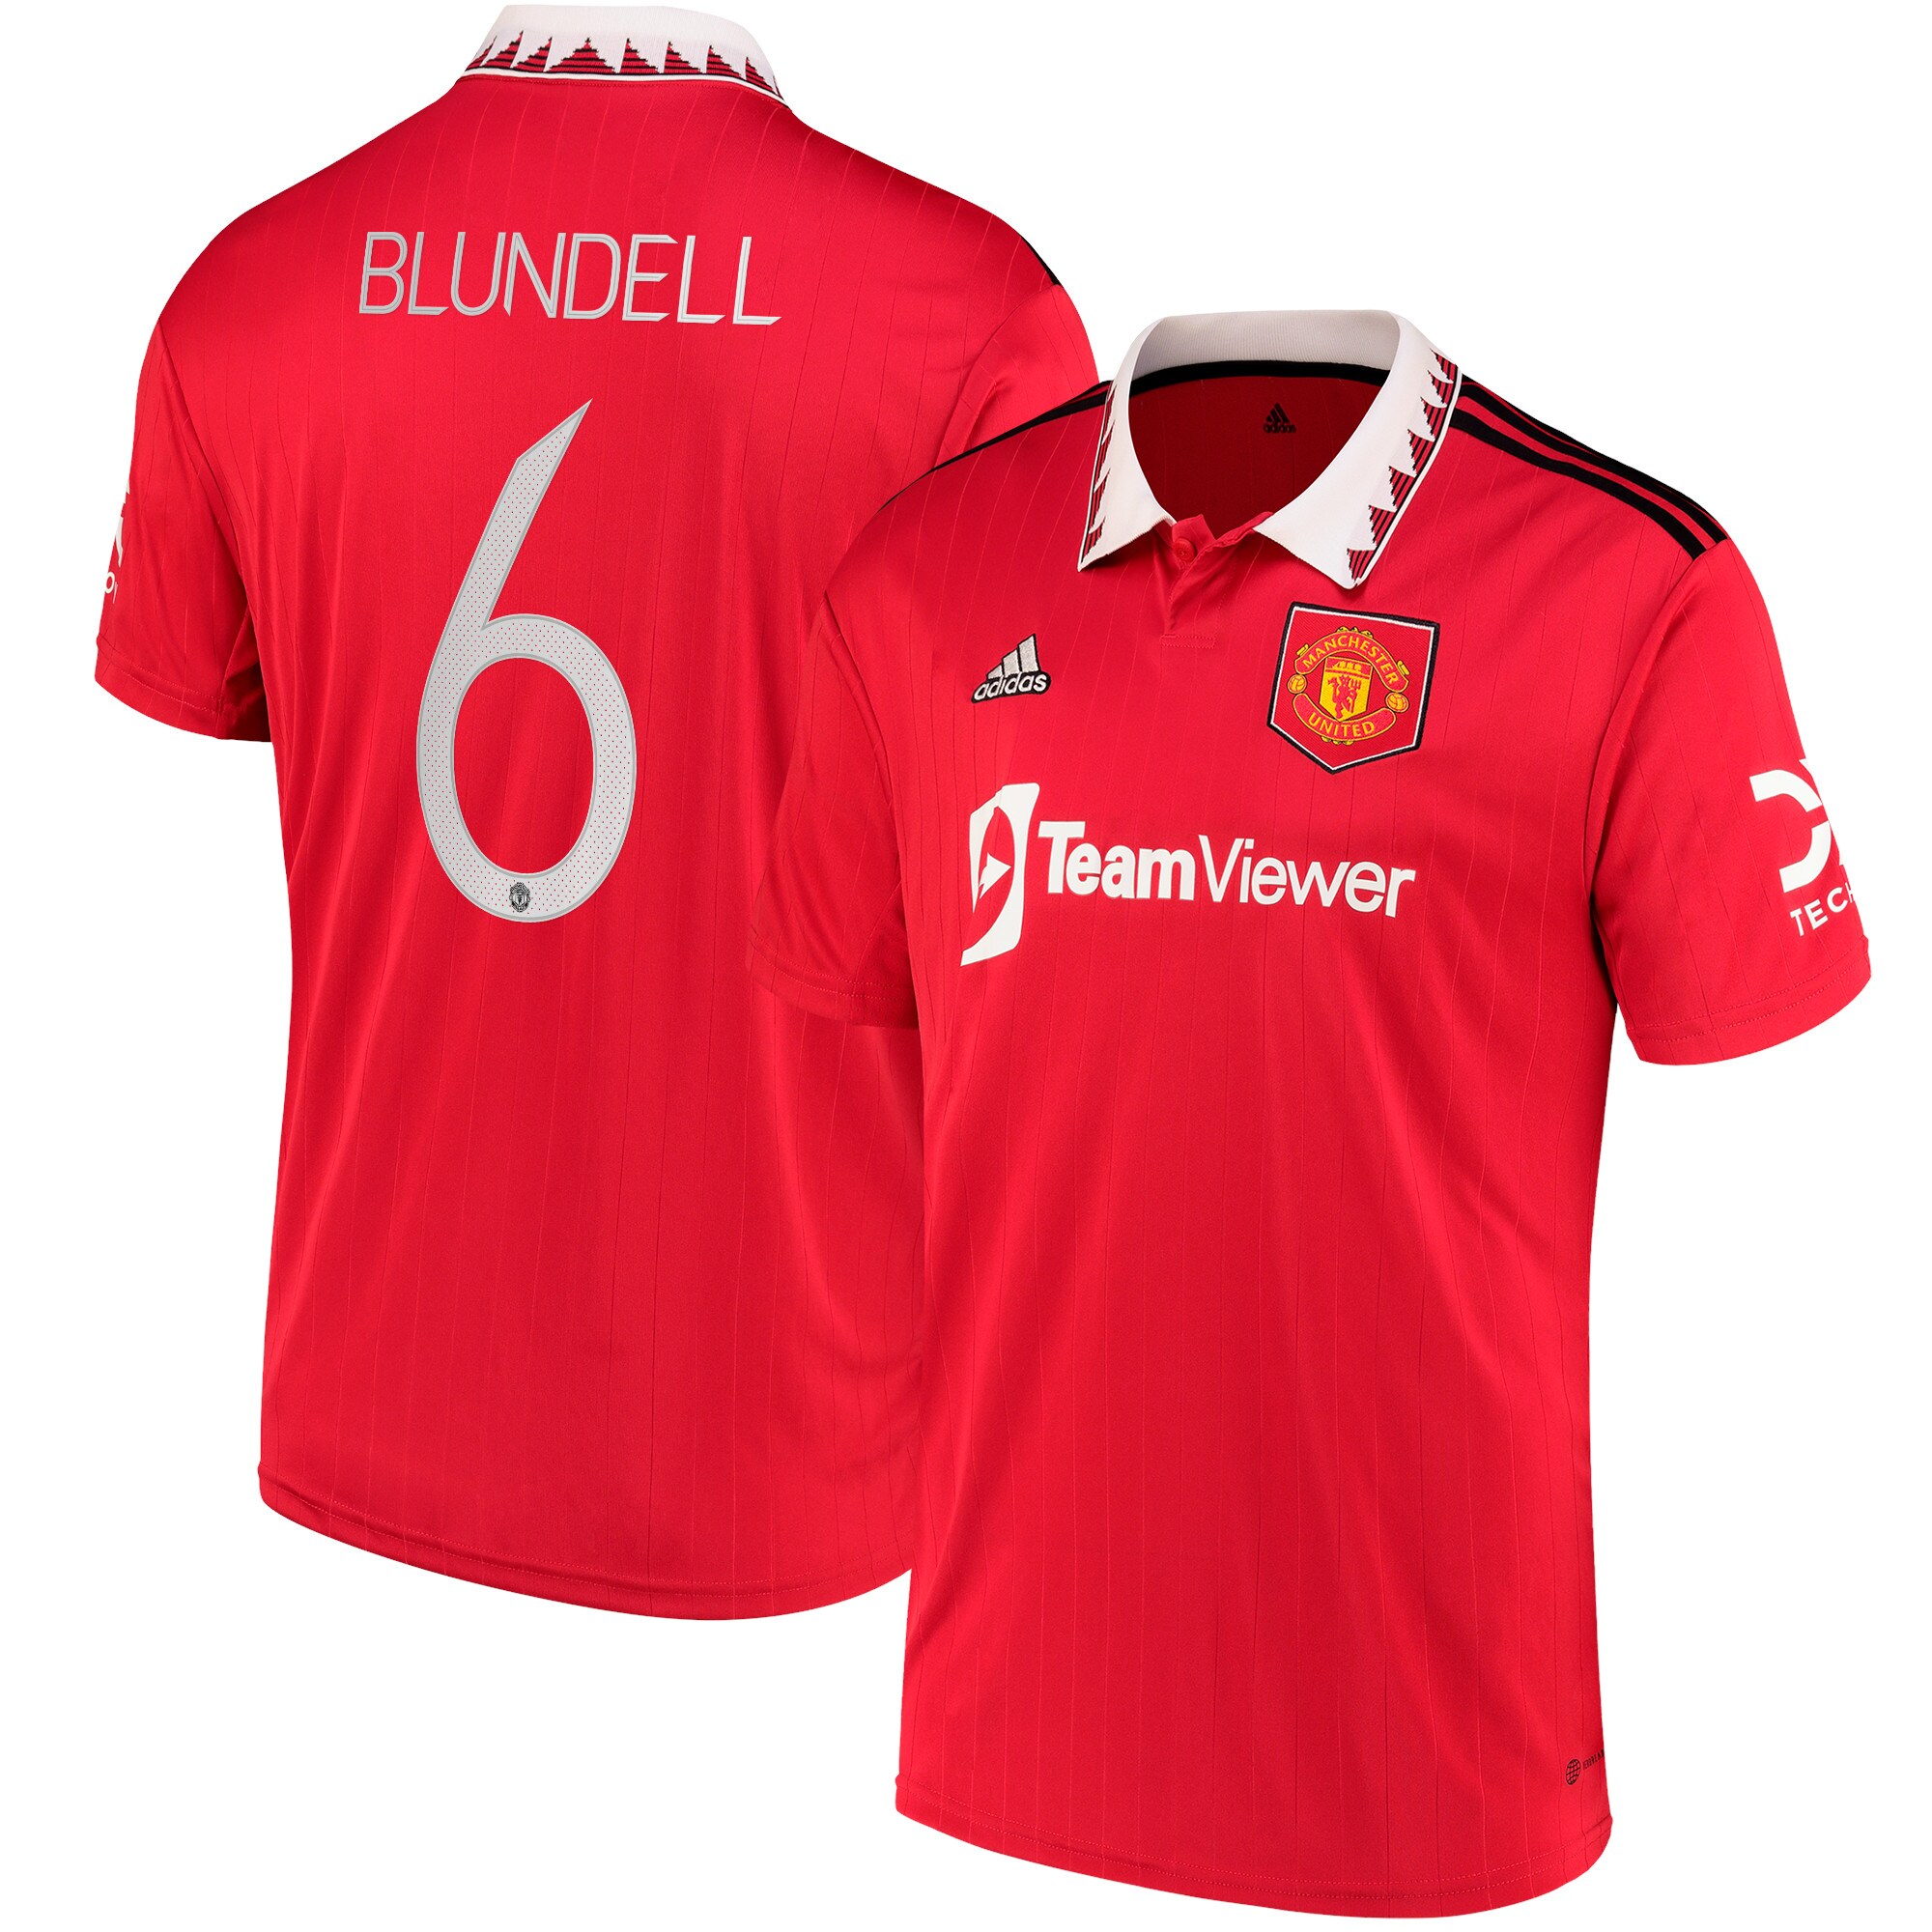 Manchester United Cup Home Shirt 2022-23 with Blundell 6 printing